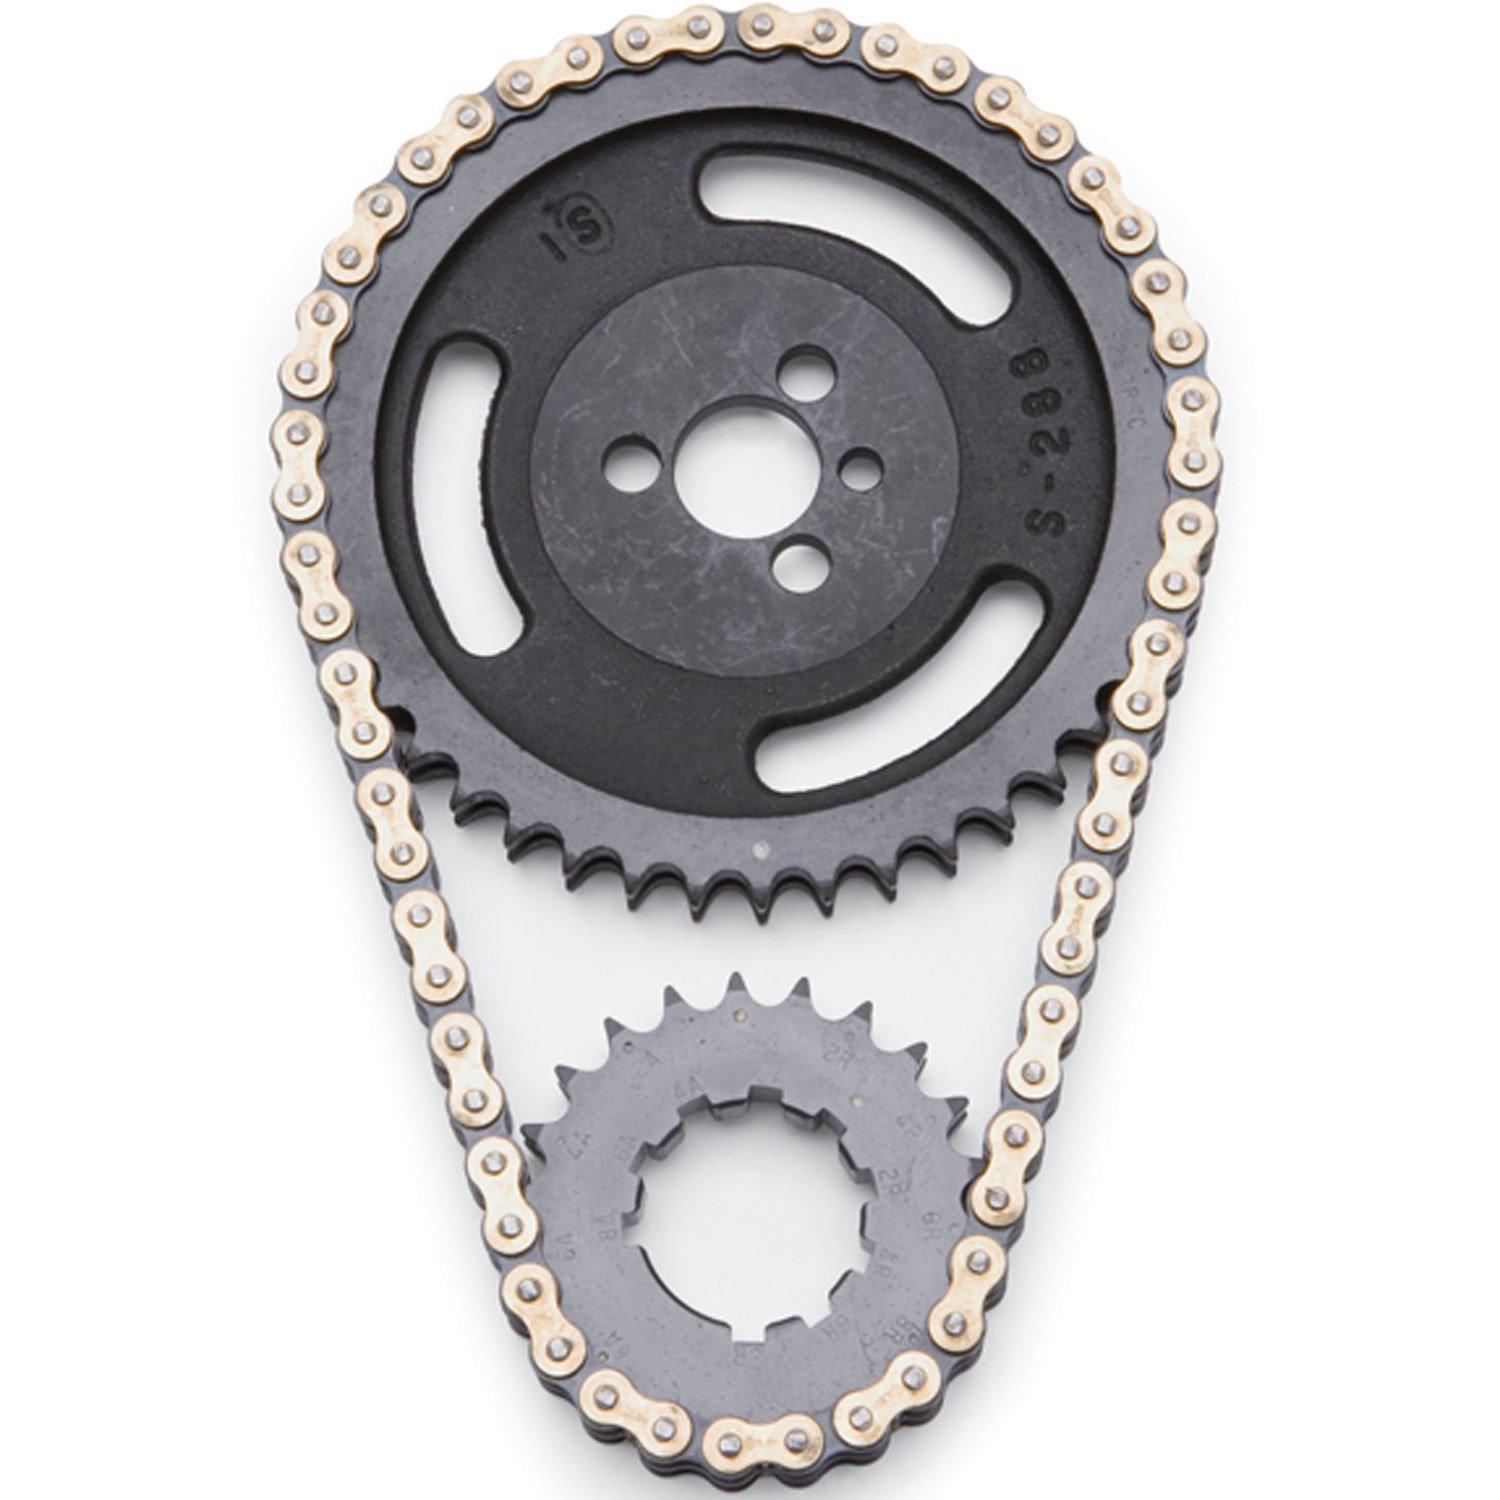 Victor-Link Timing Chain Set for 1955-1986 Small Block